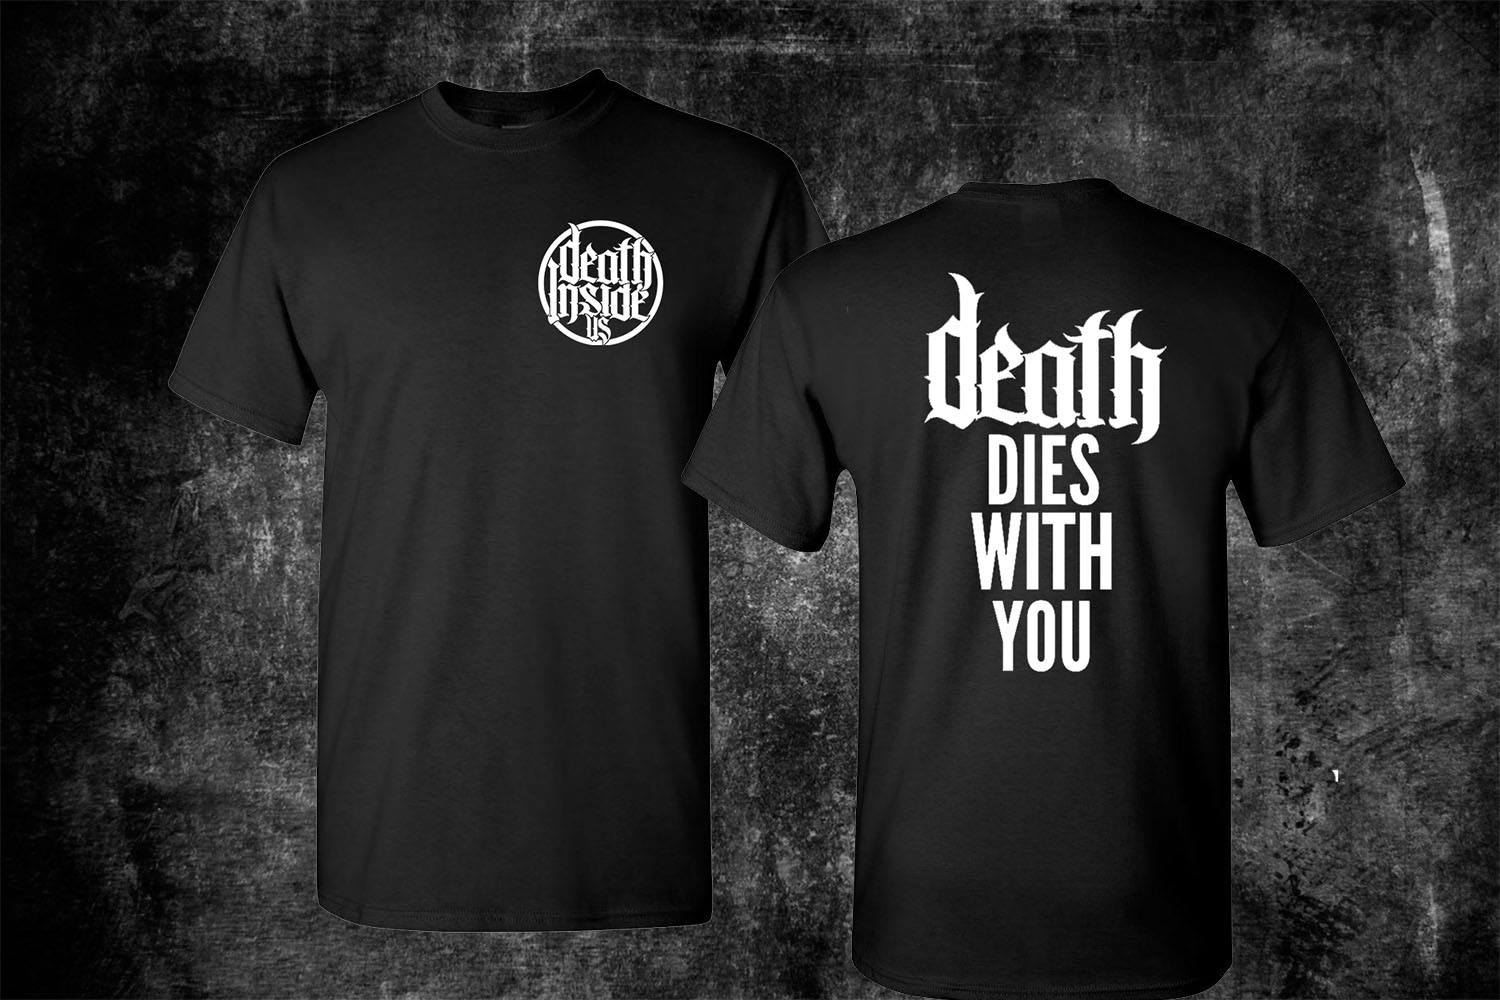 Image of "Death Dies With You" Tee